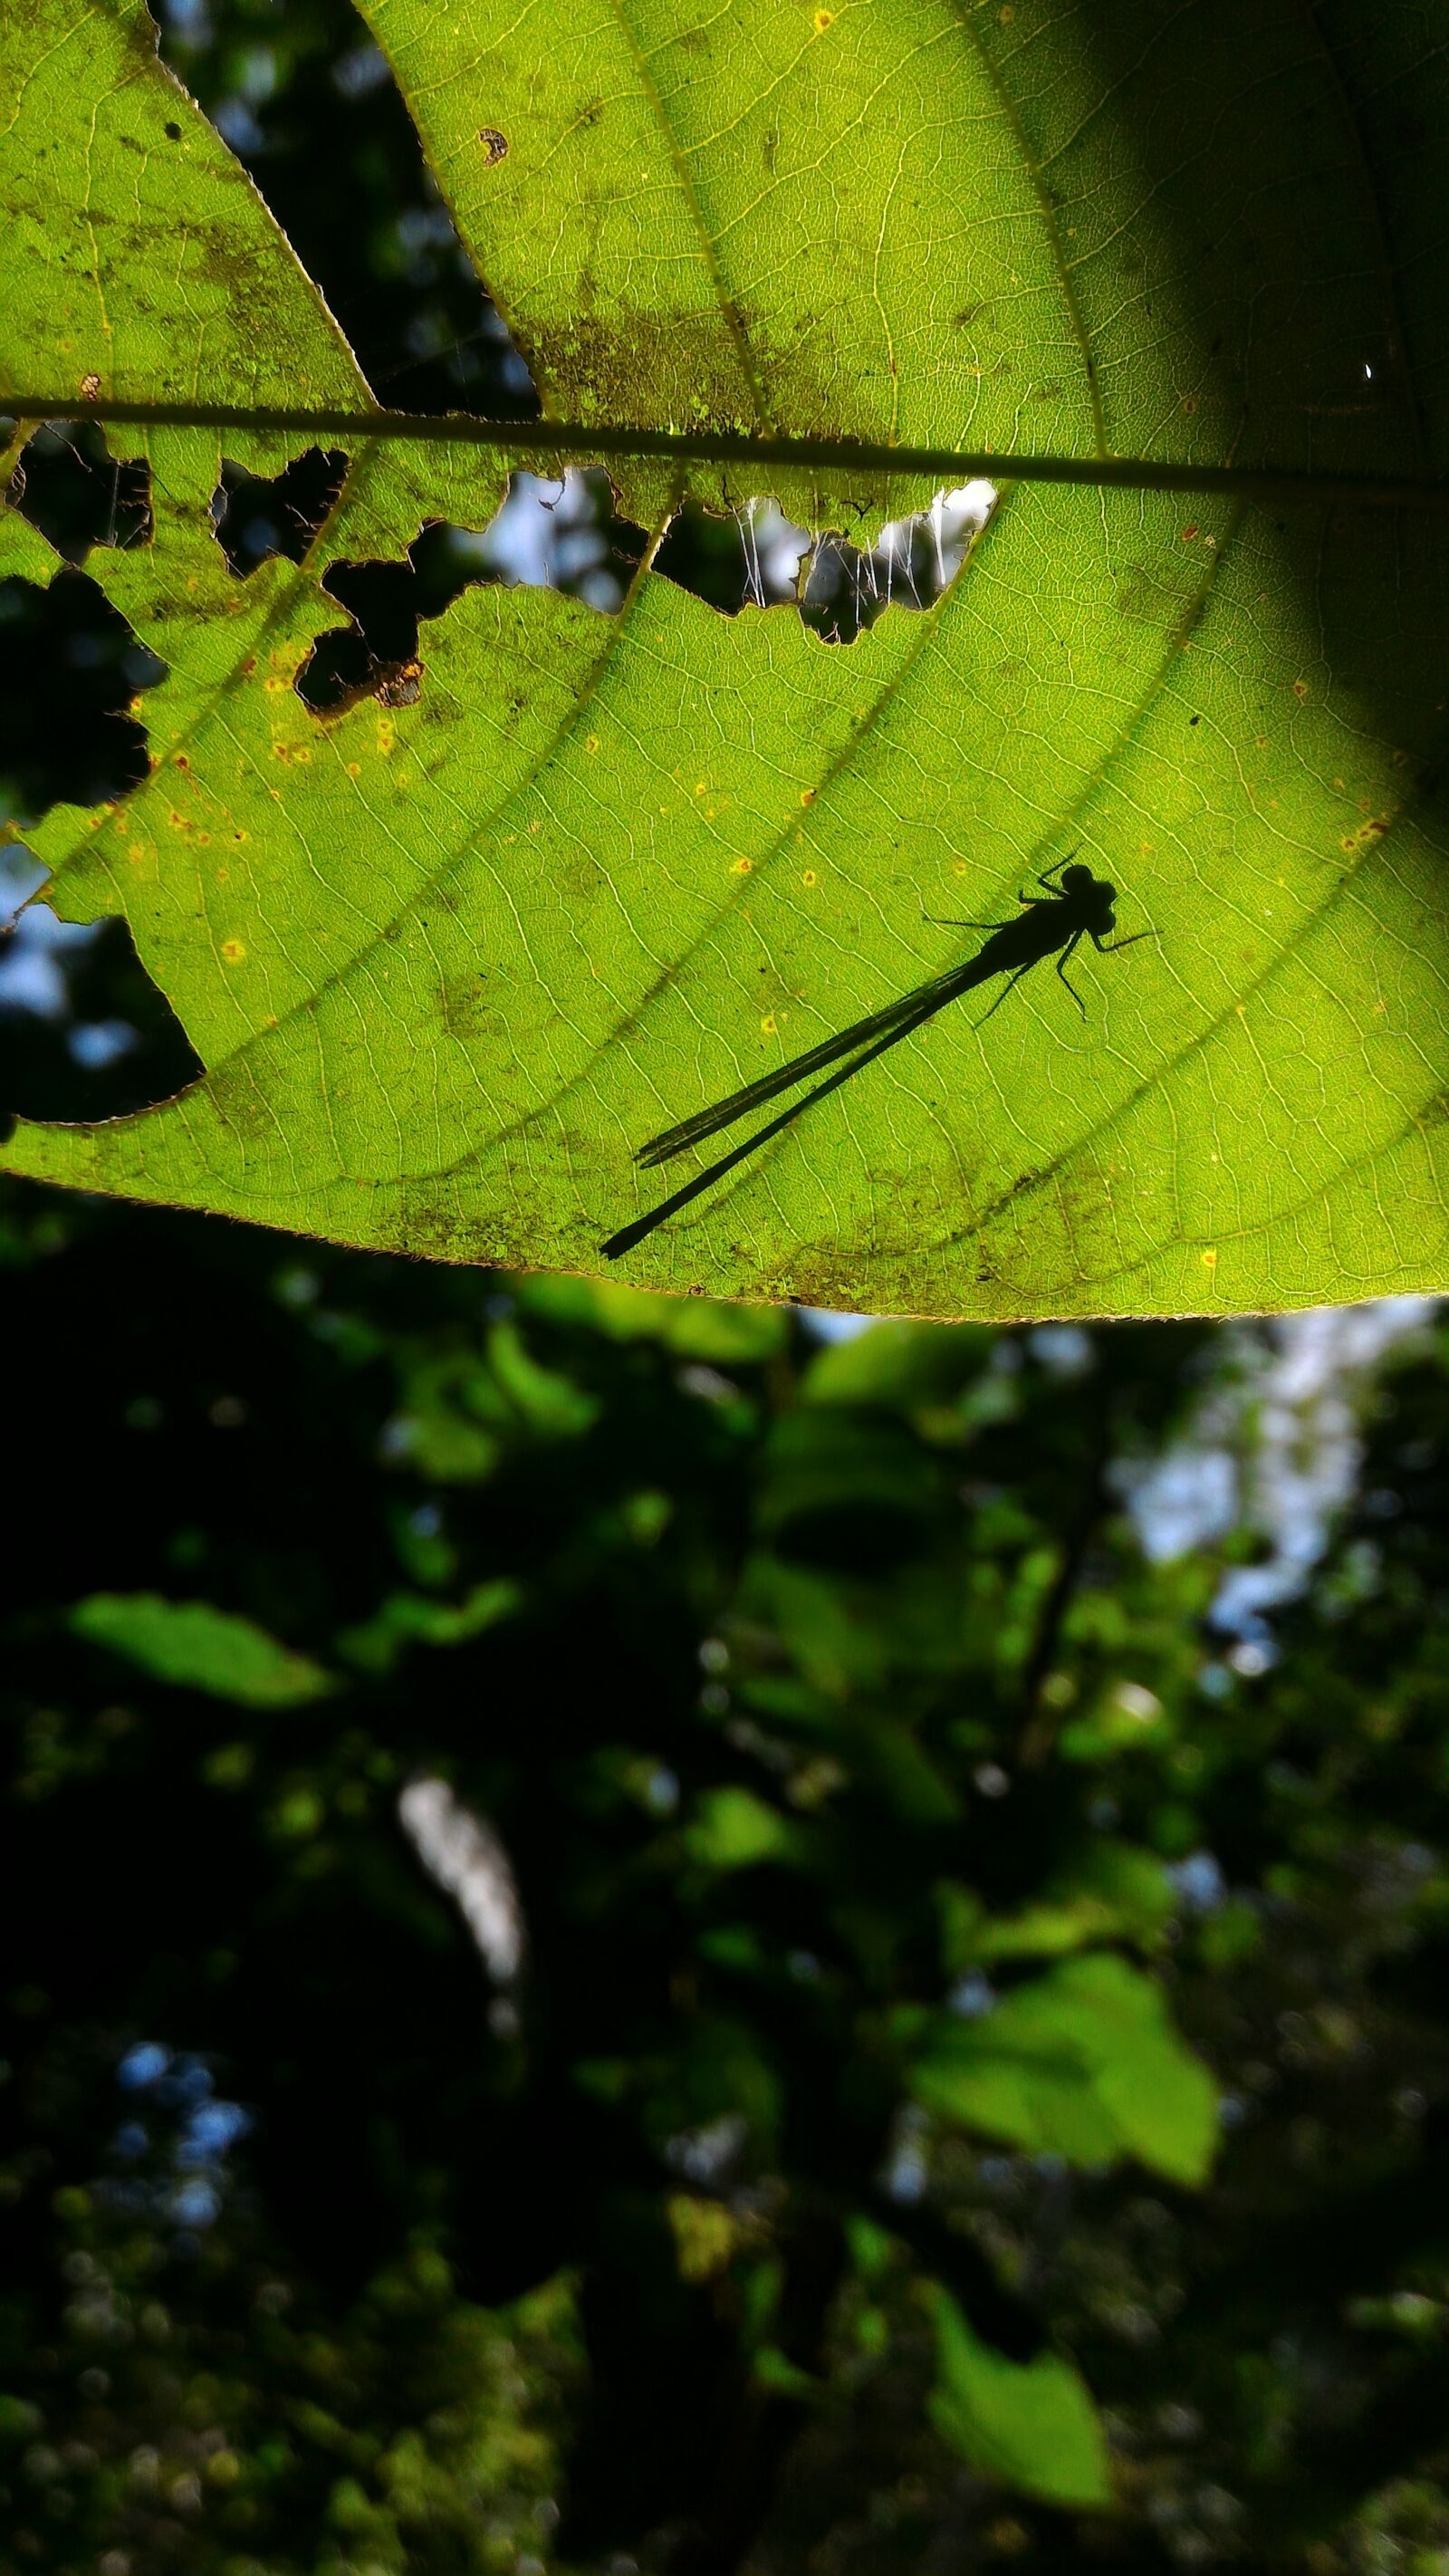 ASUS Z00AD sample photo. Dragonflies, fly, insect, nature photography